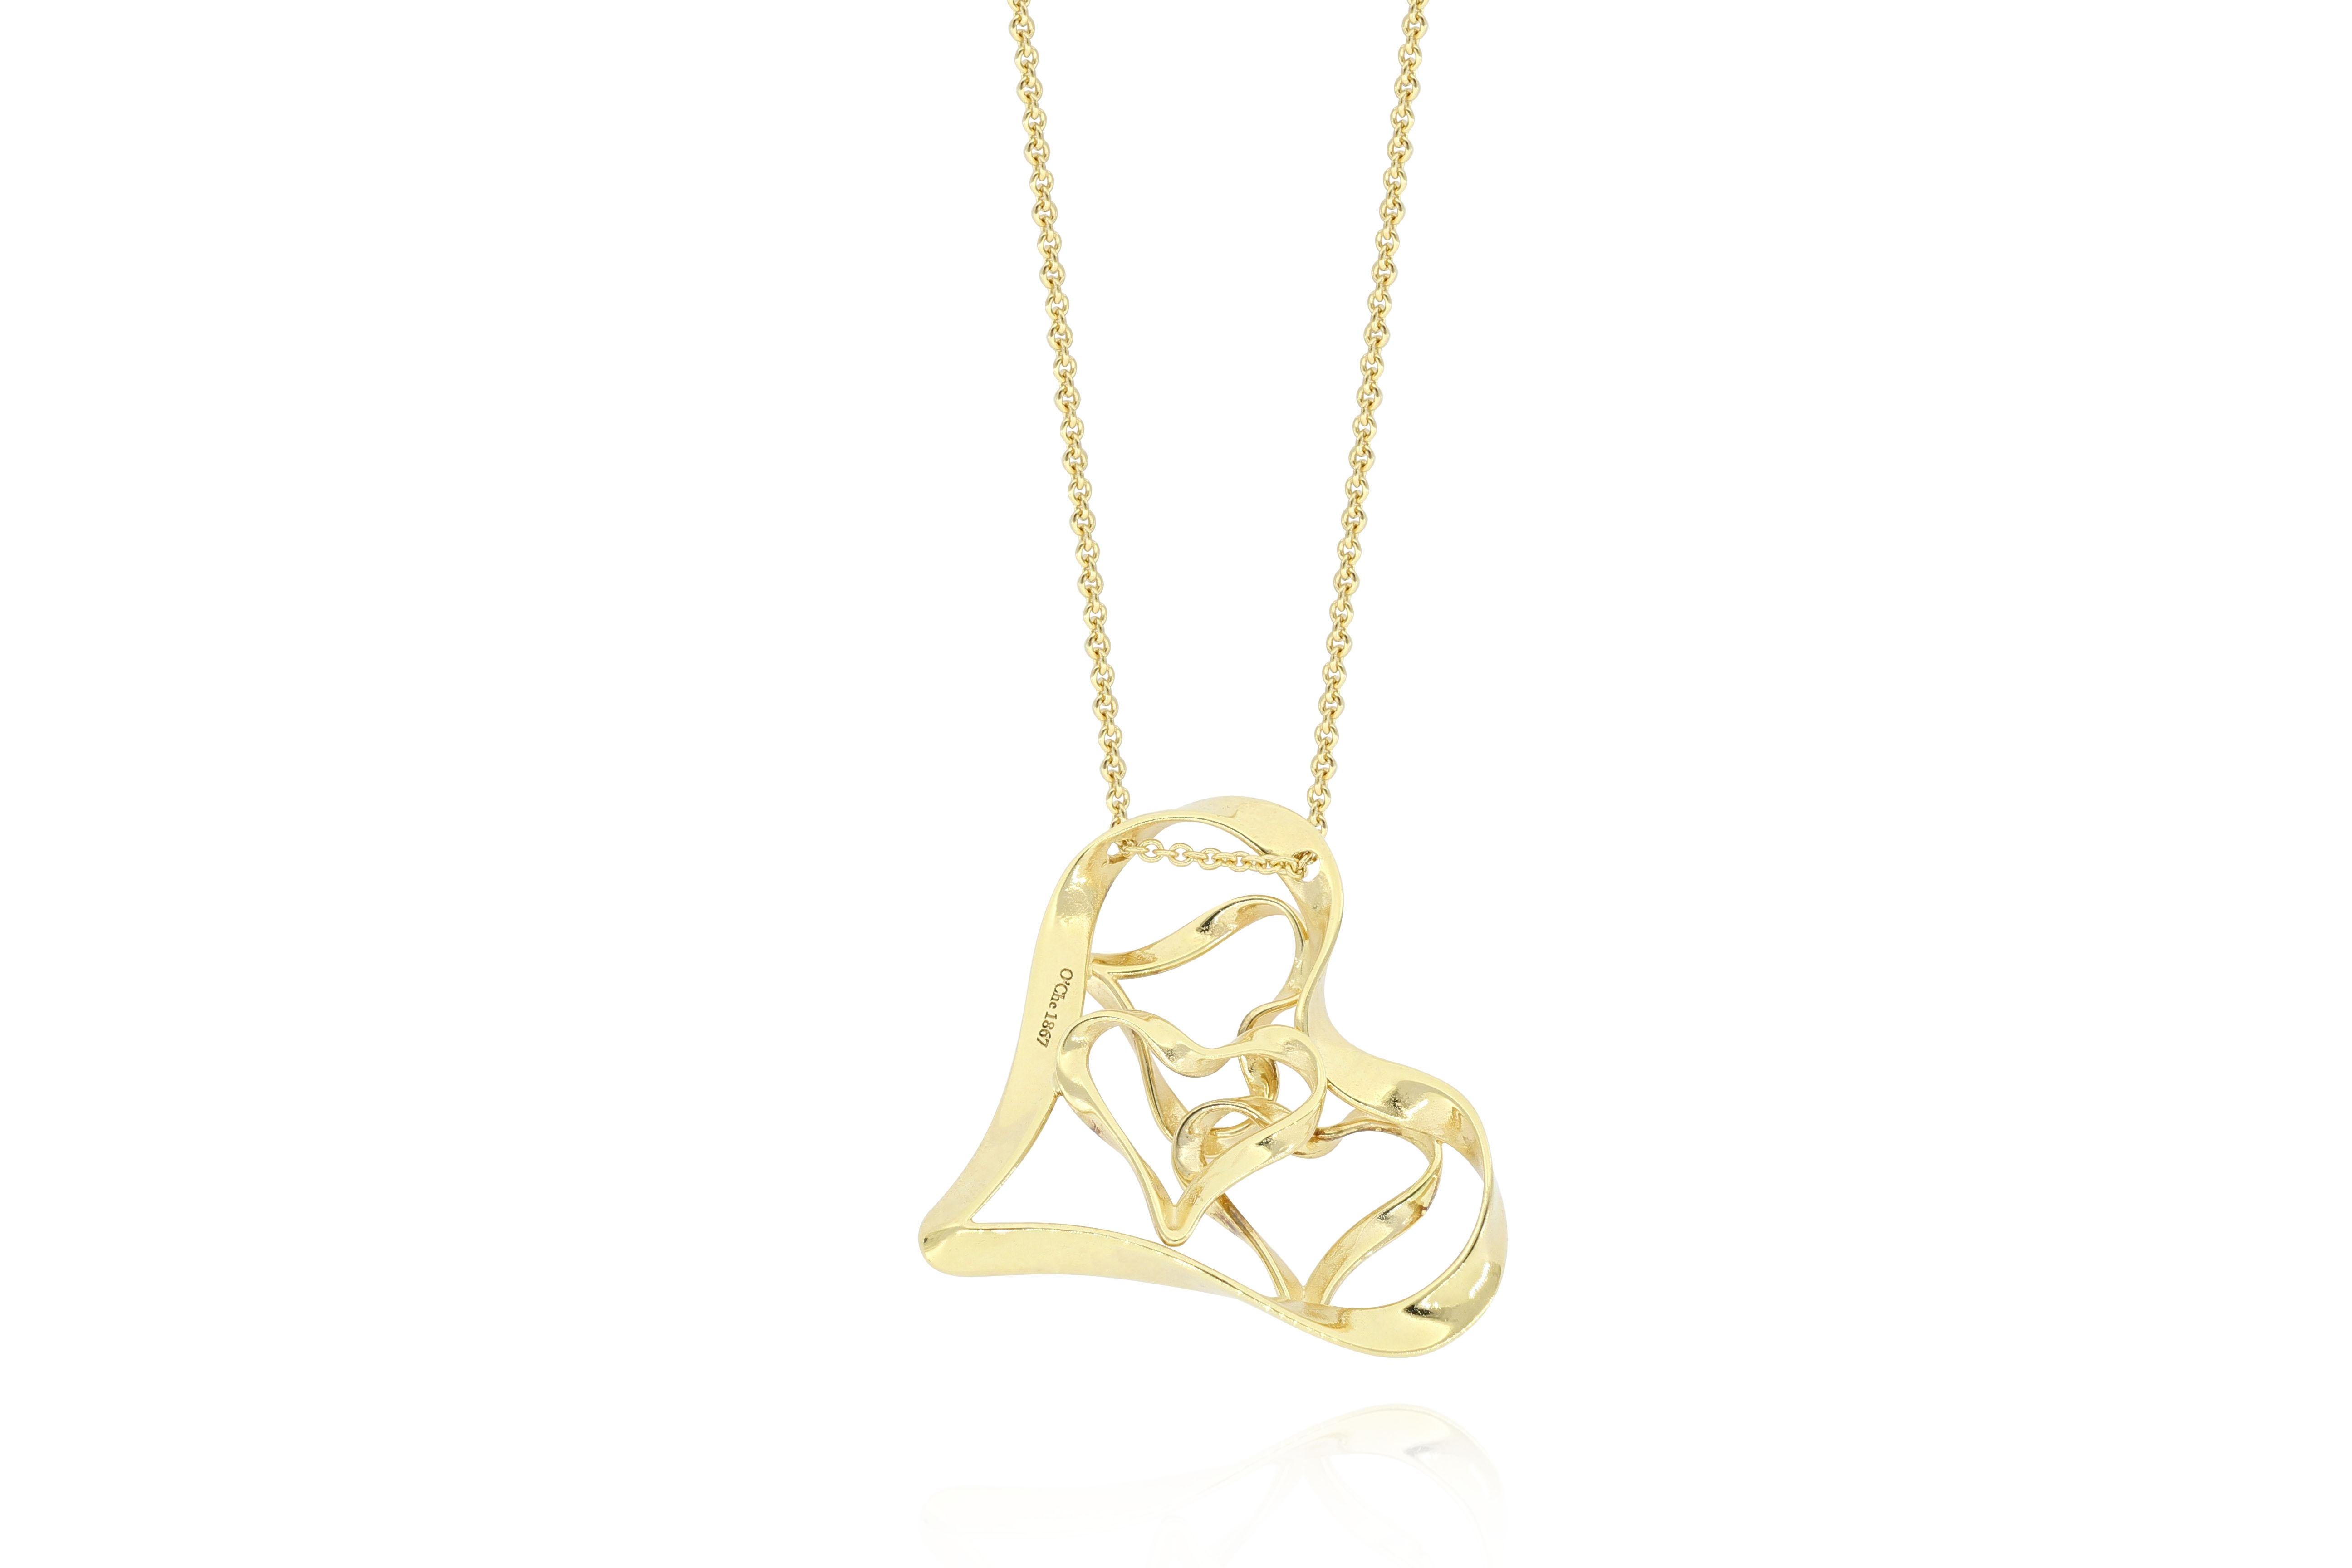 Contemporary Italian 18K Gold Abstract Heart Shape Pendant Necklace For Sale